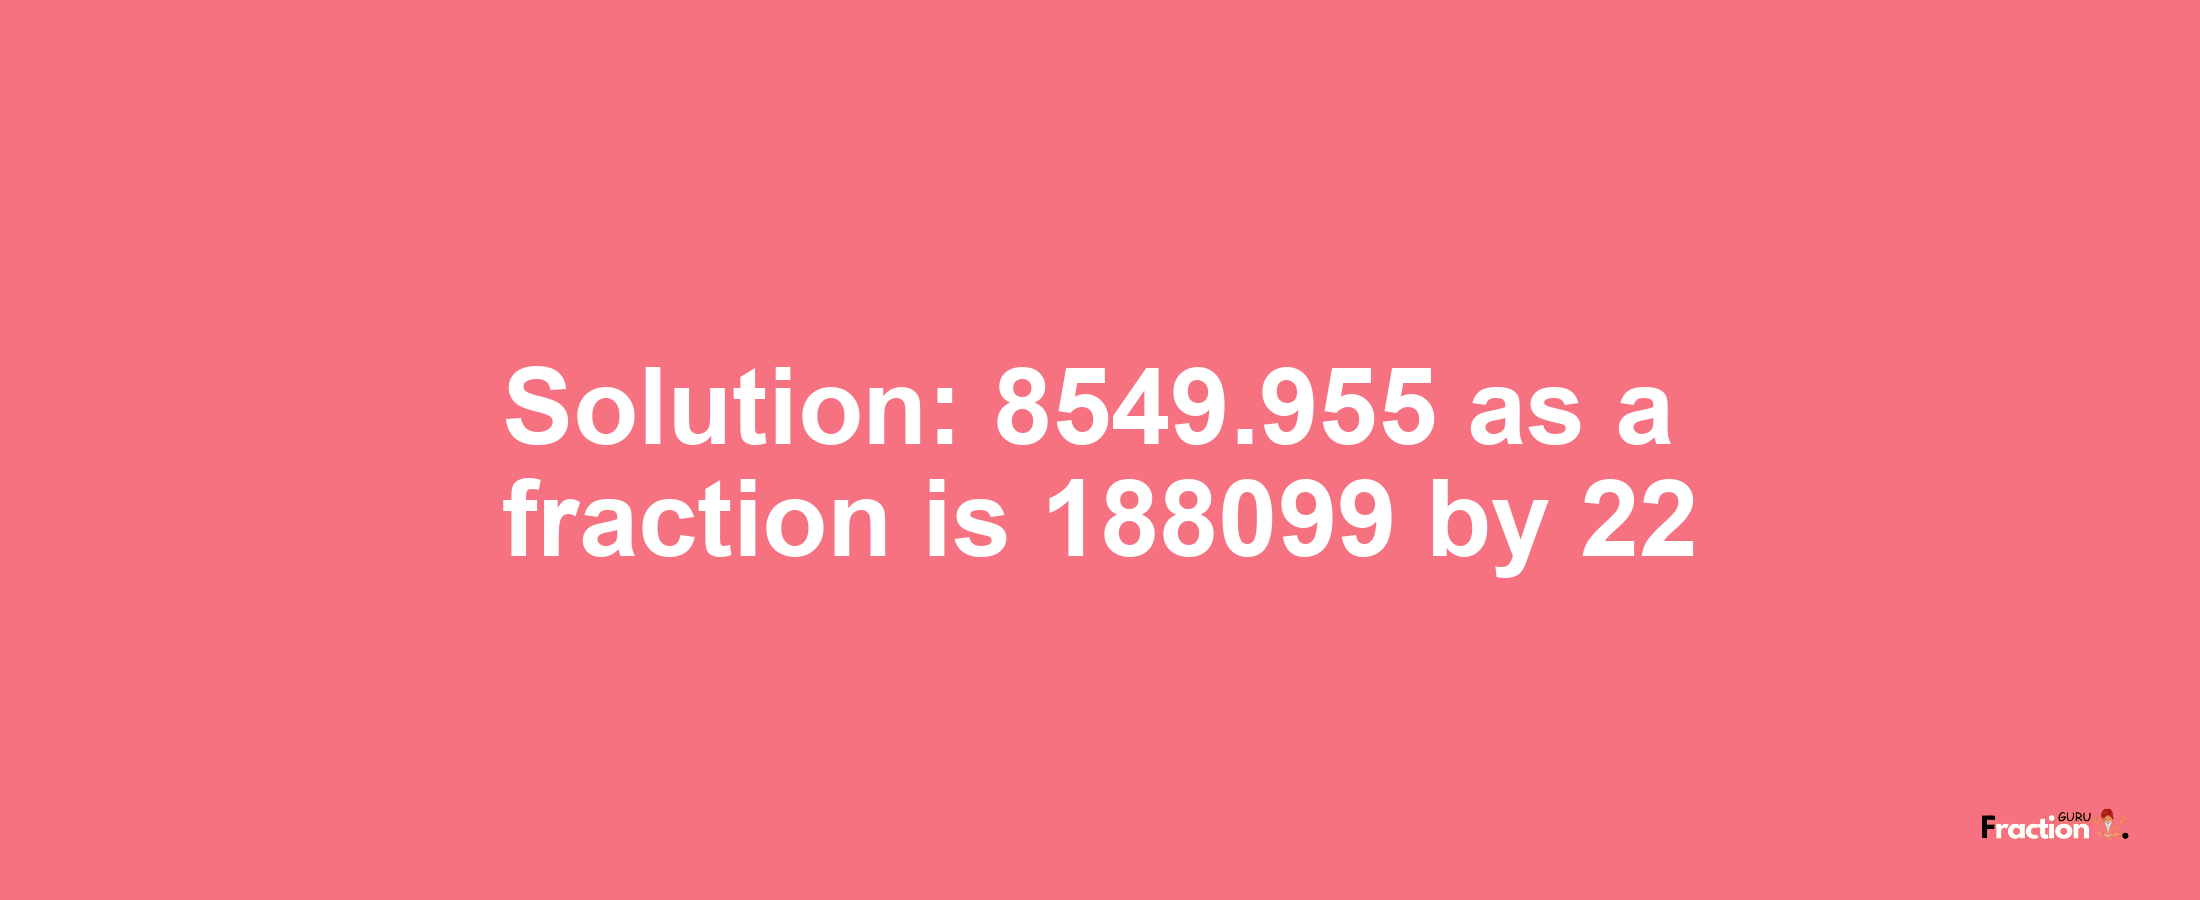 Solution:8549.955 as a fraction is 188099/22